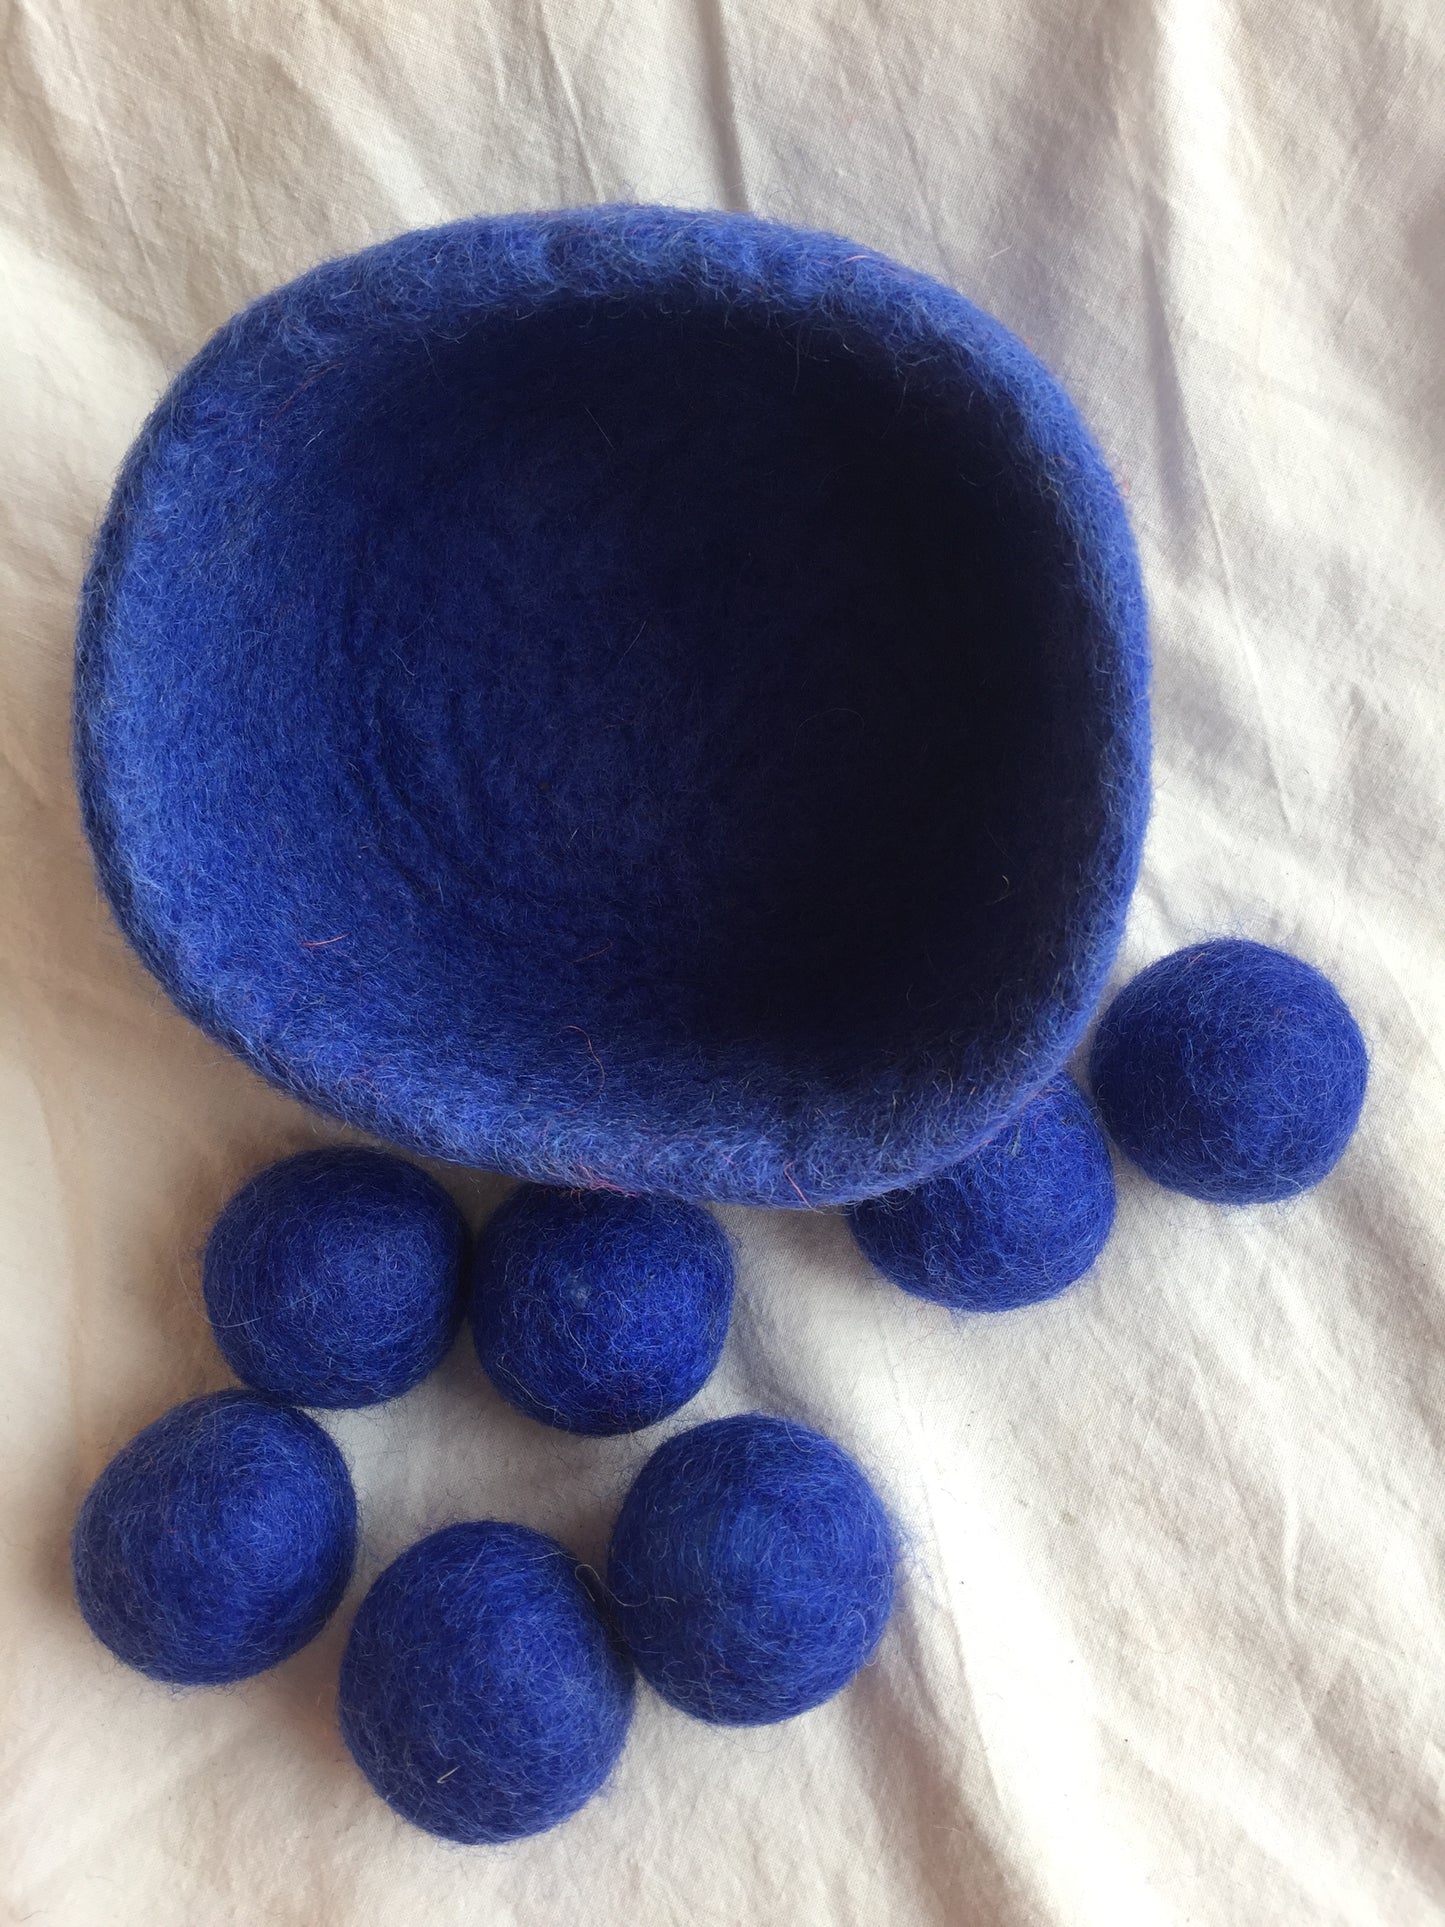 Felted Toys for Baby and Dollhouse Play Set - FELT BOWLS IN 7 COLOURS WITH 49 FELTED BALLS